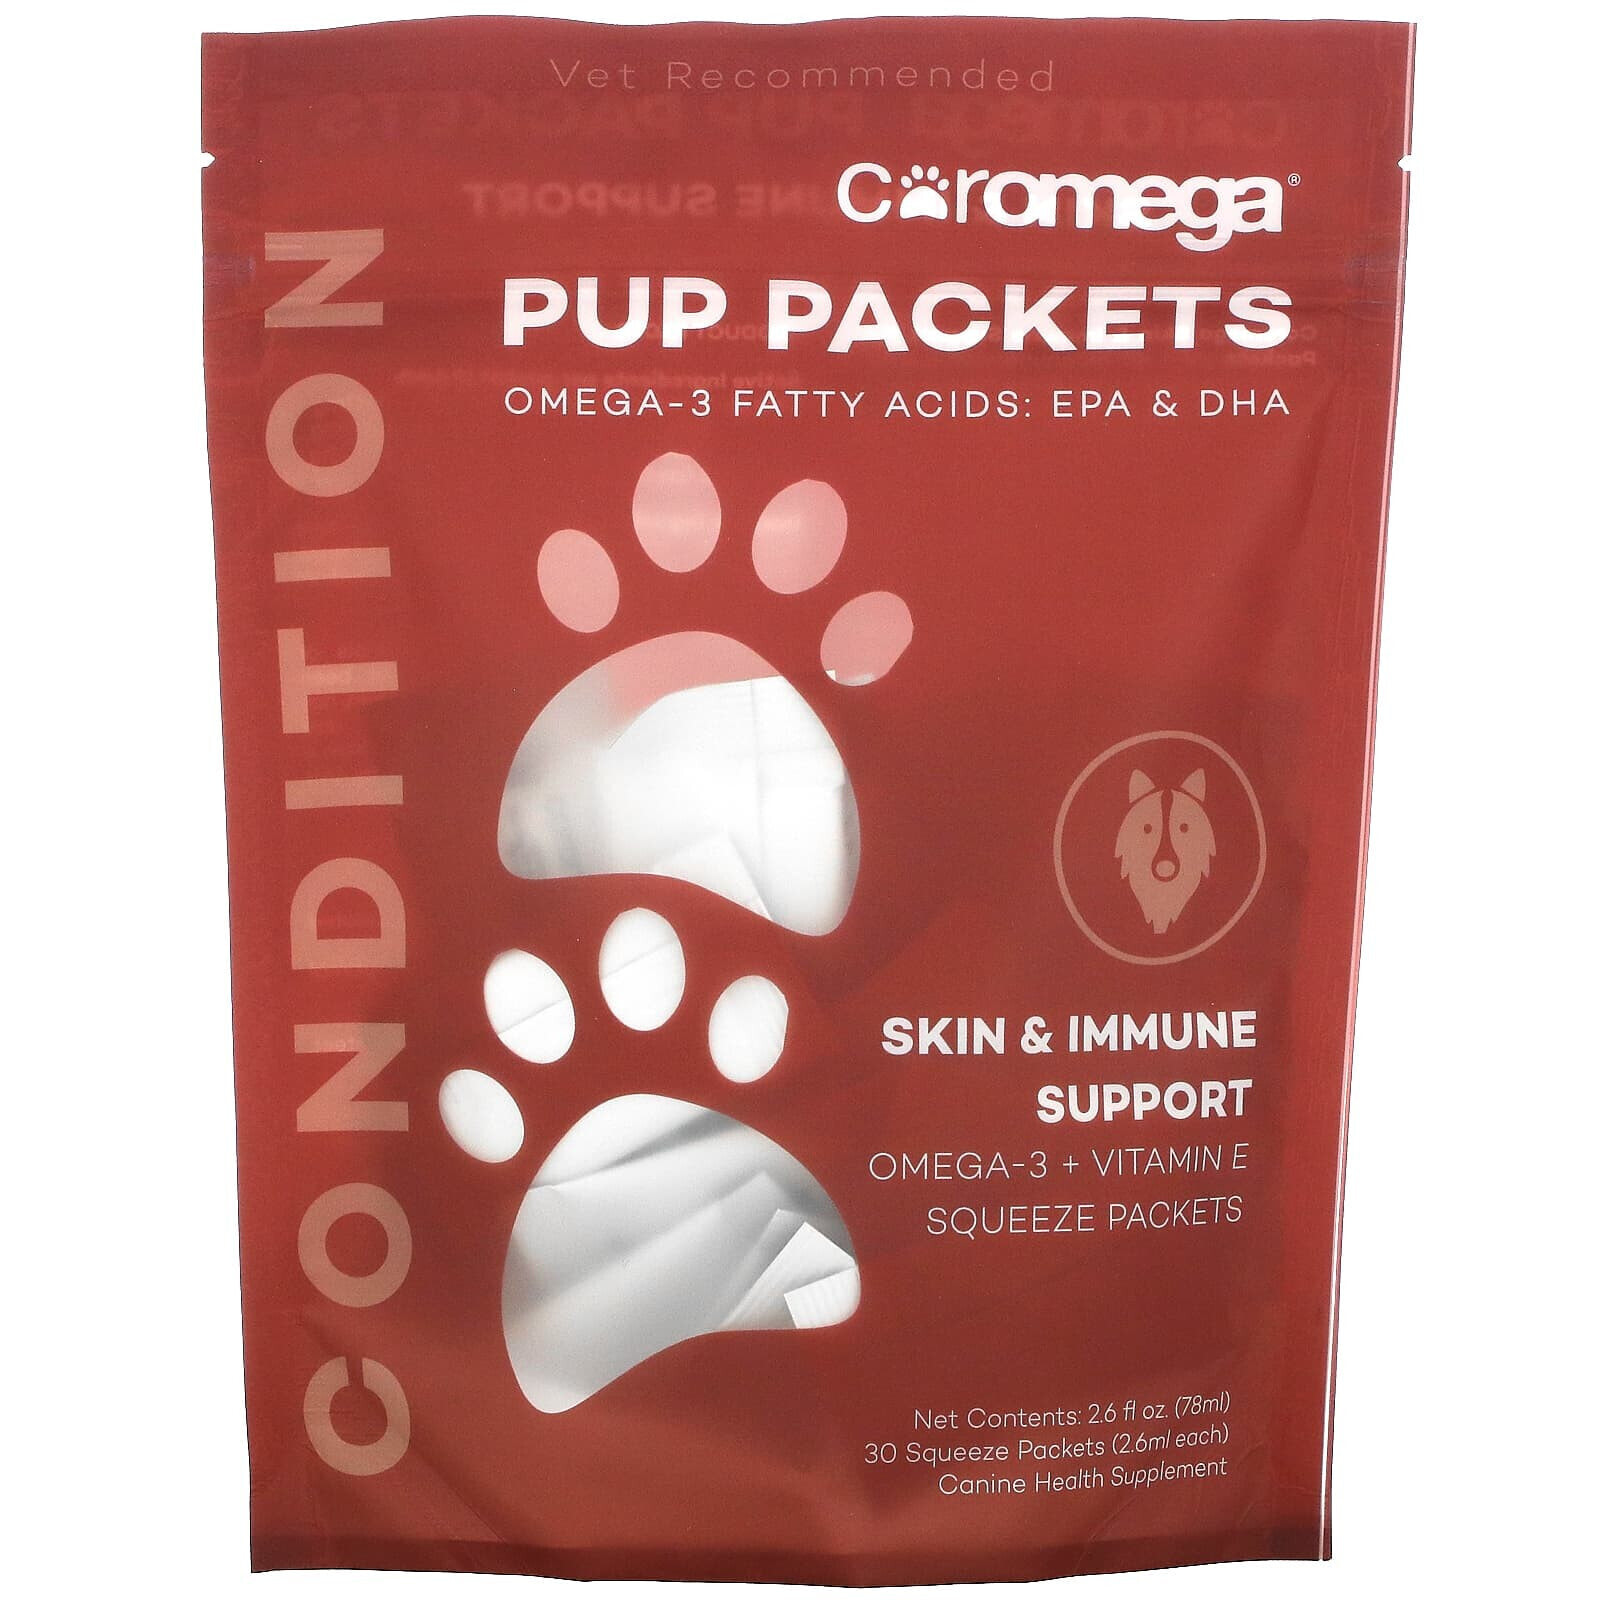 Pup Packets, Skin & Immune Support, Wild Fish, 30 Squeeze Packets, 2.6 ml Each